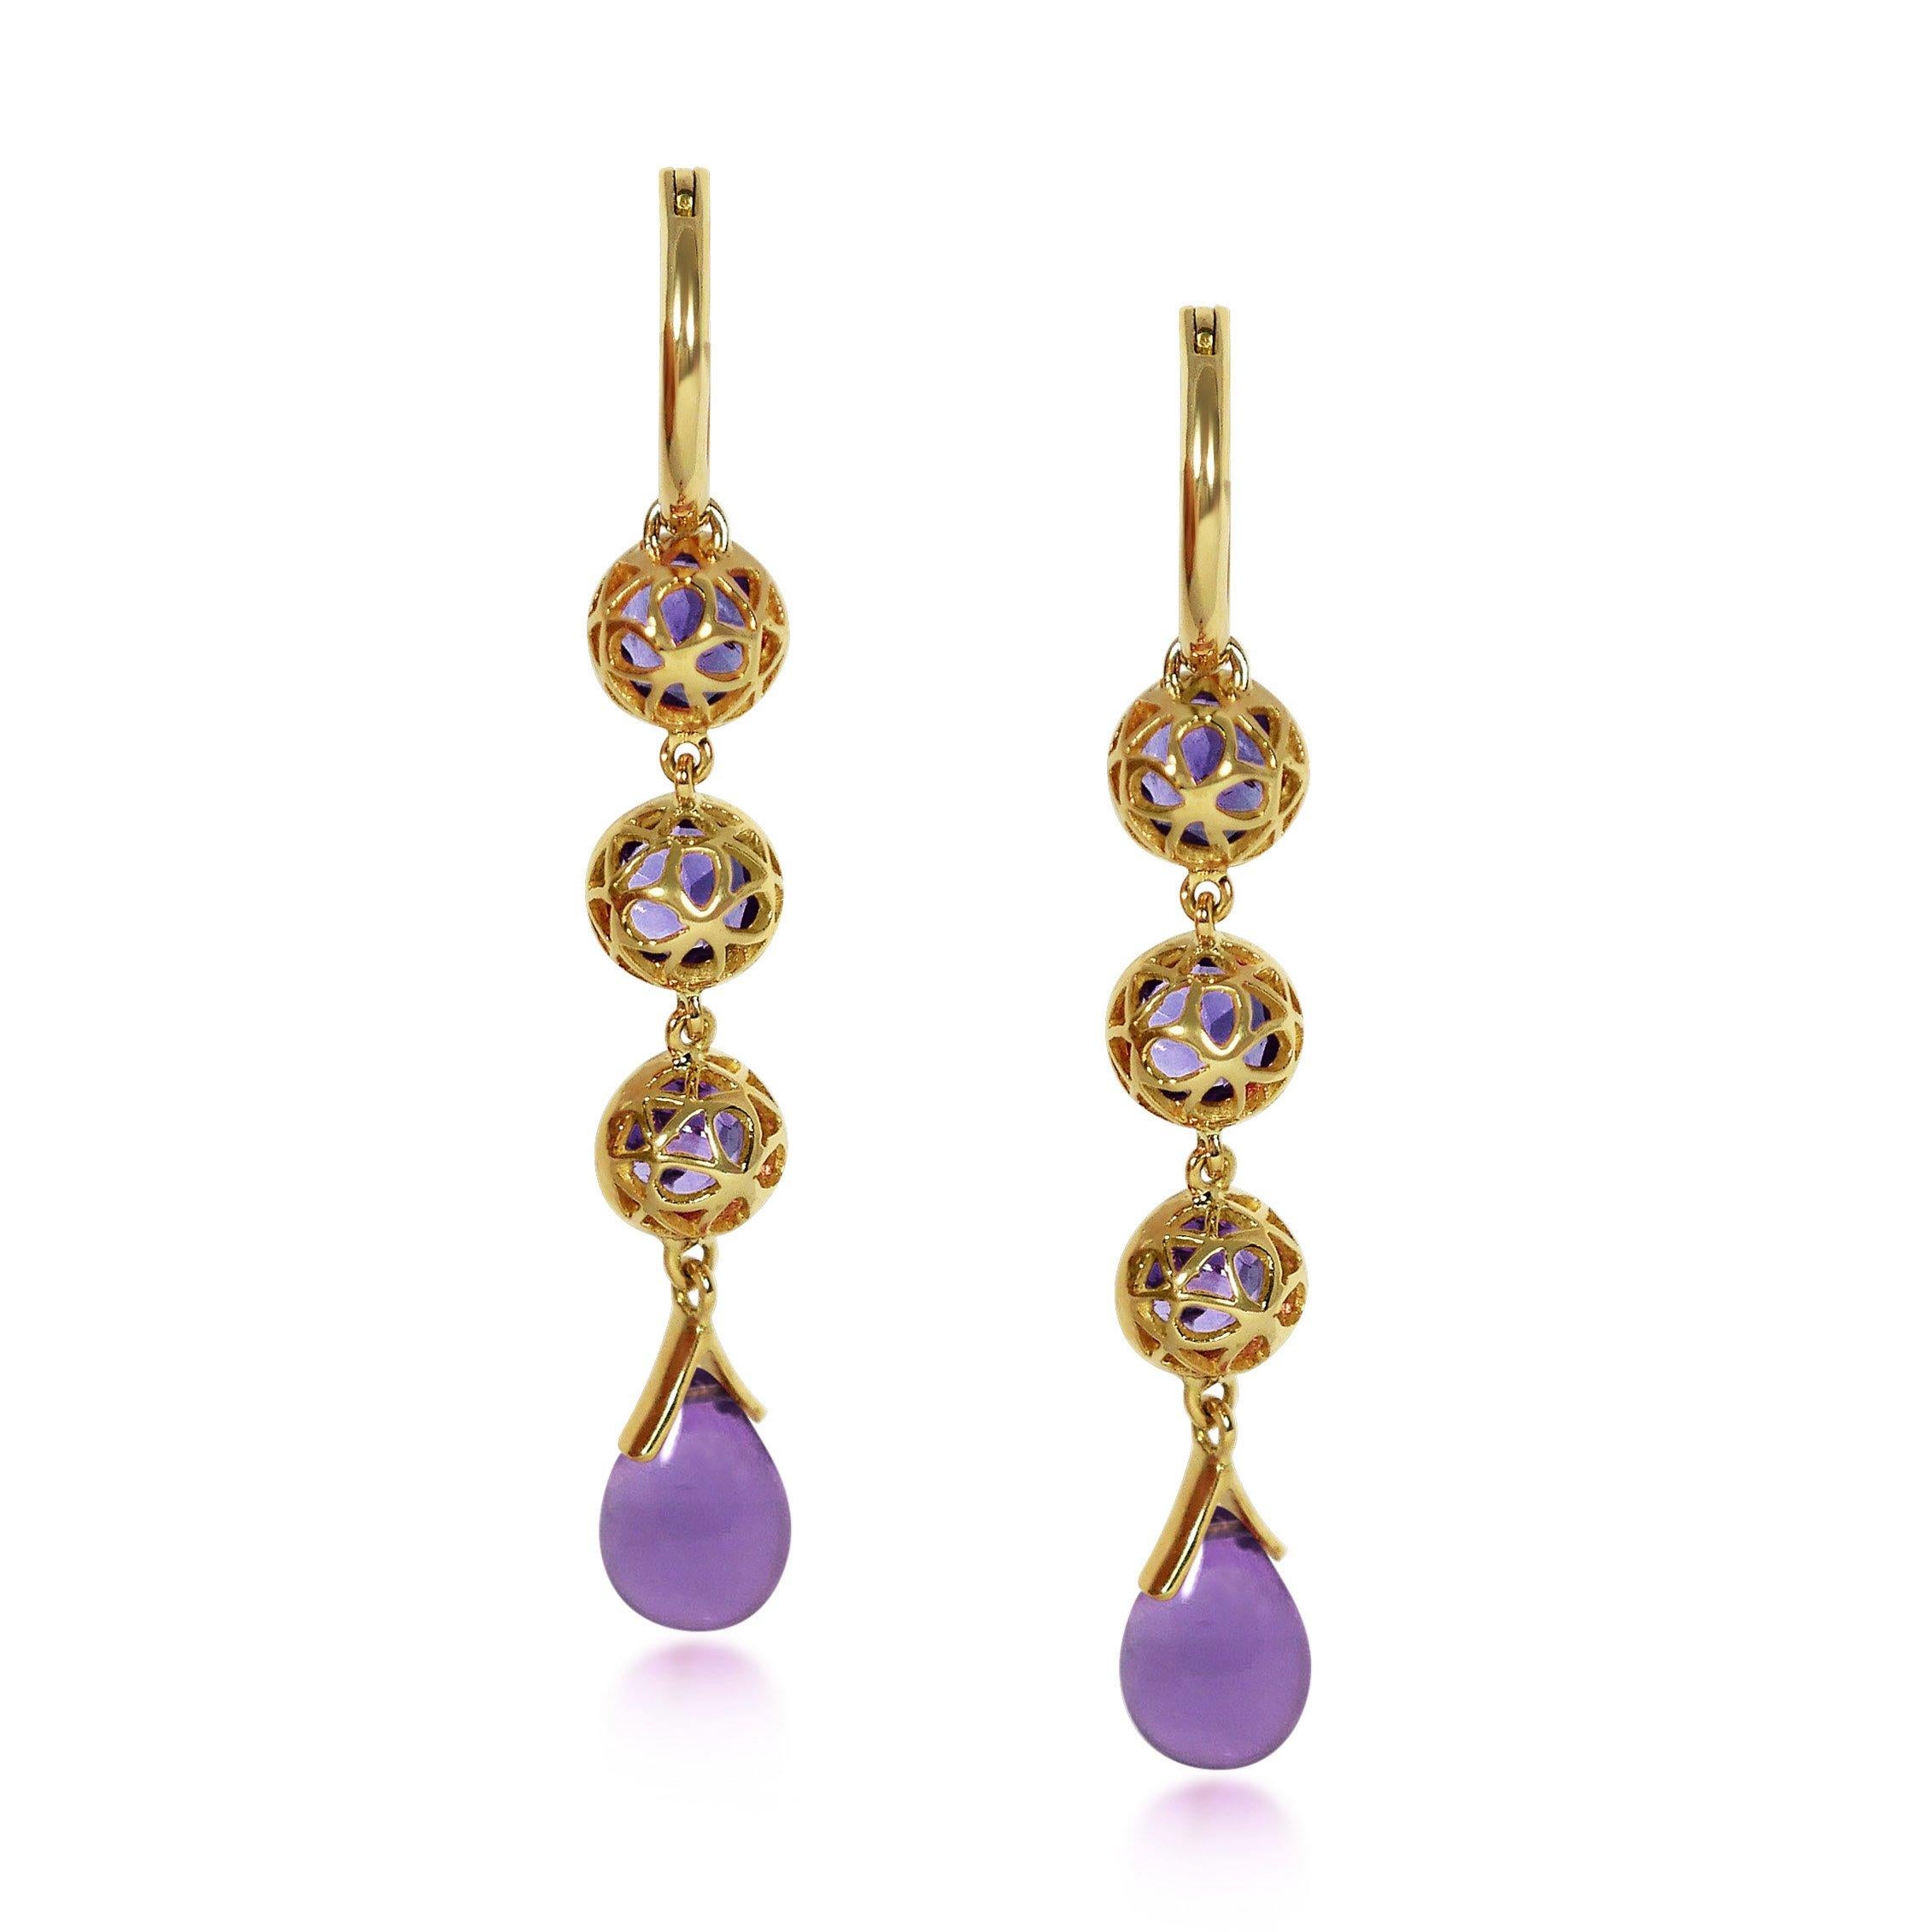 Brilliant Cut Handcrafted 1.50 Carats Amethysts 18 Karat Yellow Gold Drop Earrings For Sale